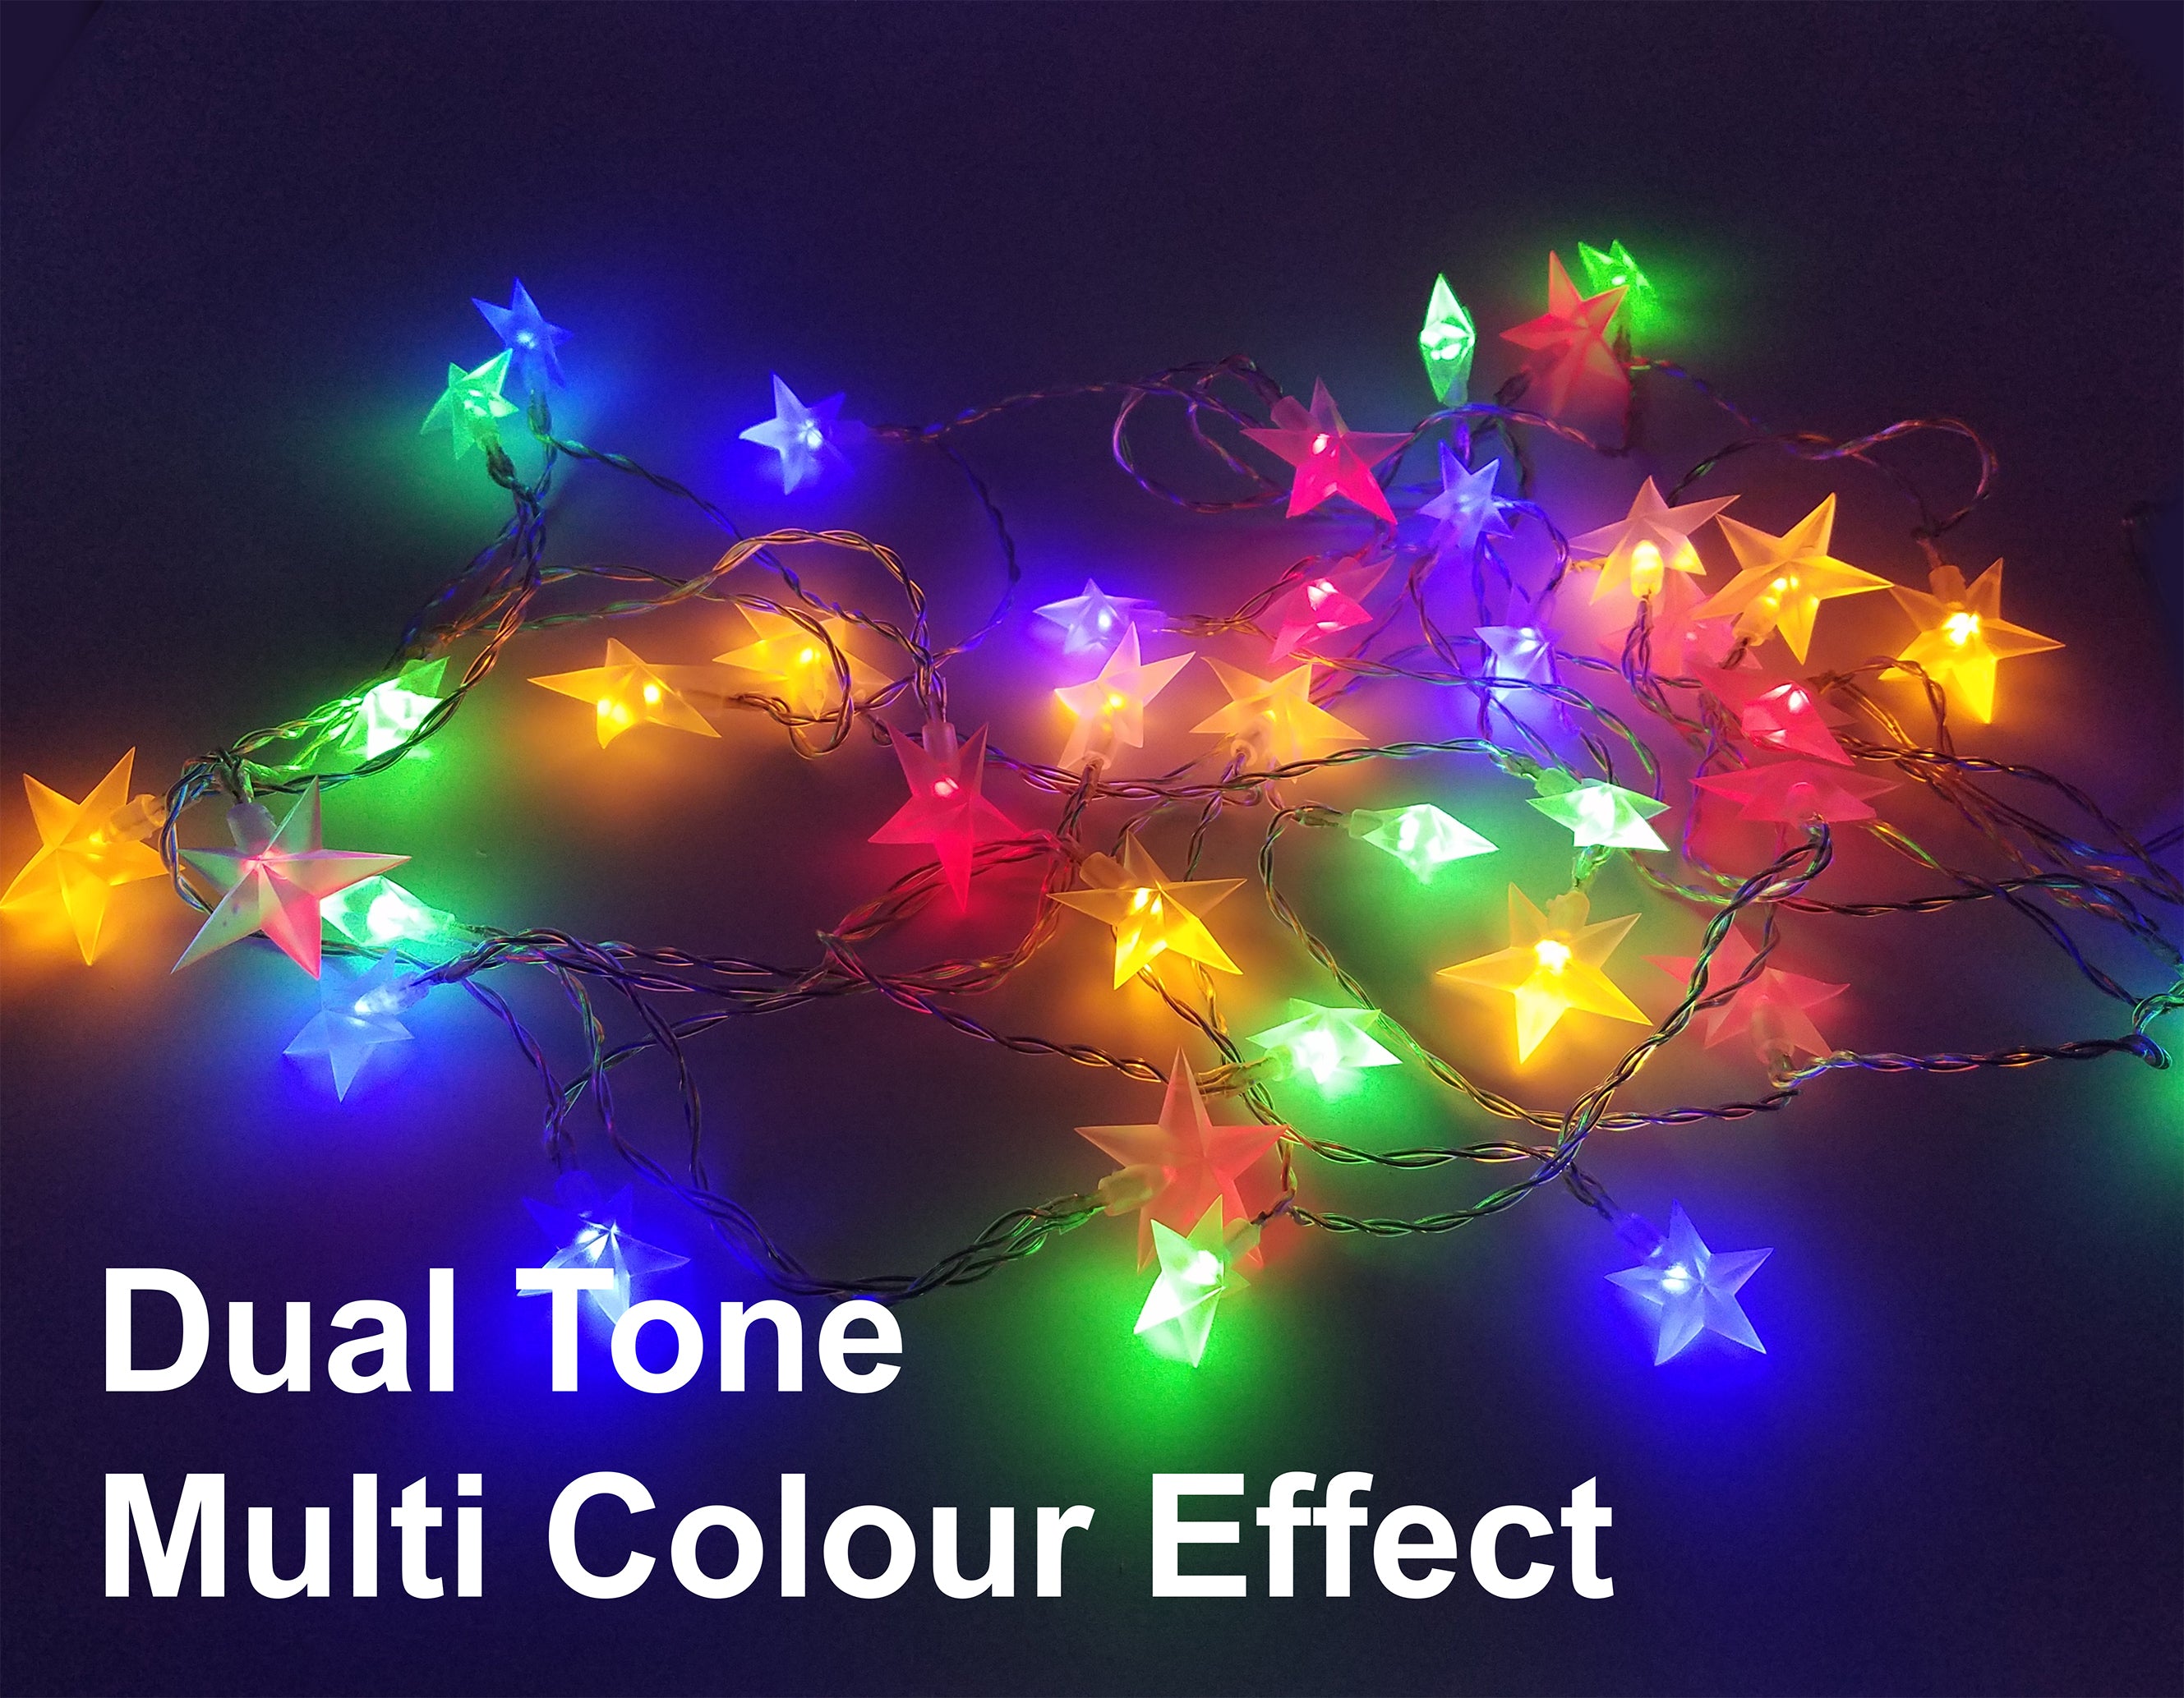 FluxTech - Twinkle Starry 40 x Dual Colour LED Lights by Santa’s Factory – Multi-function Effect – Timer function - Battery Operated